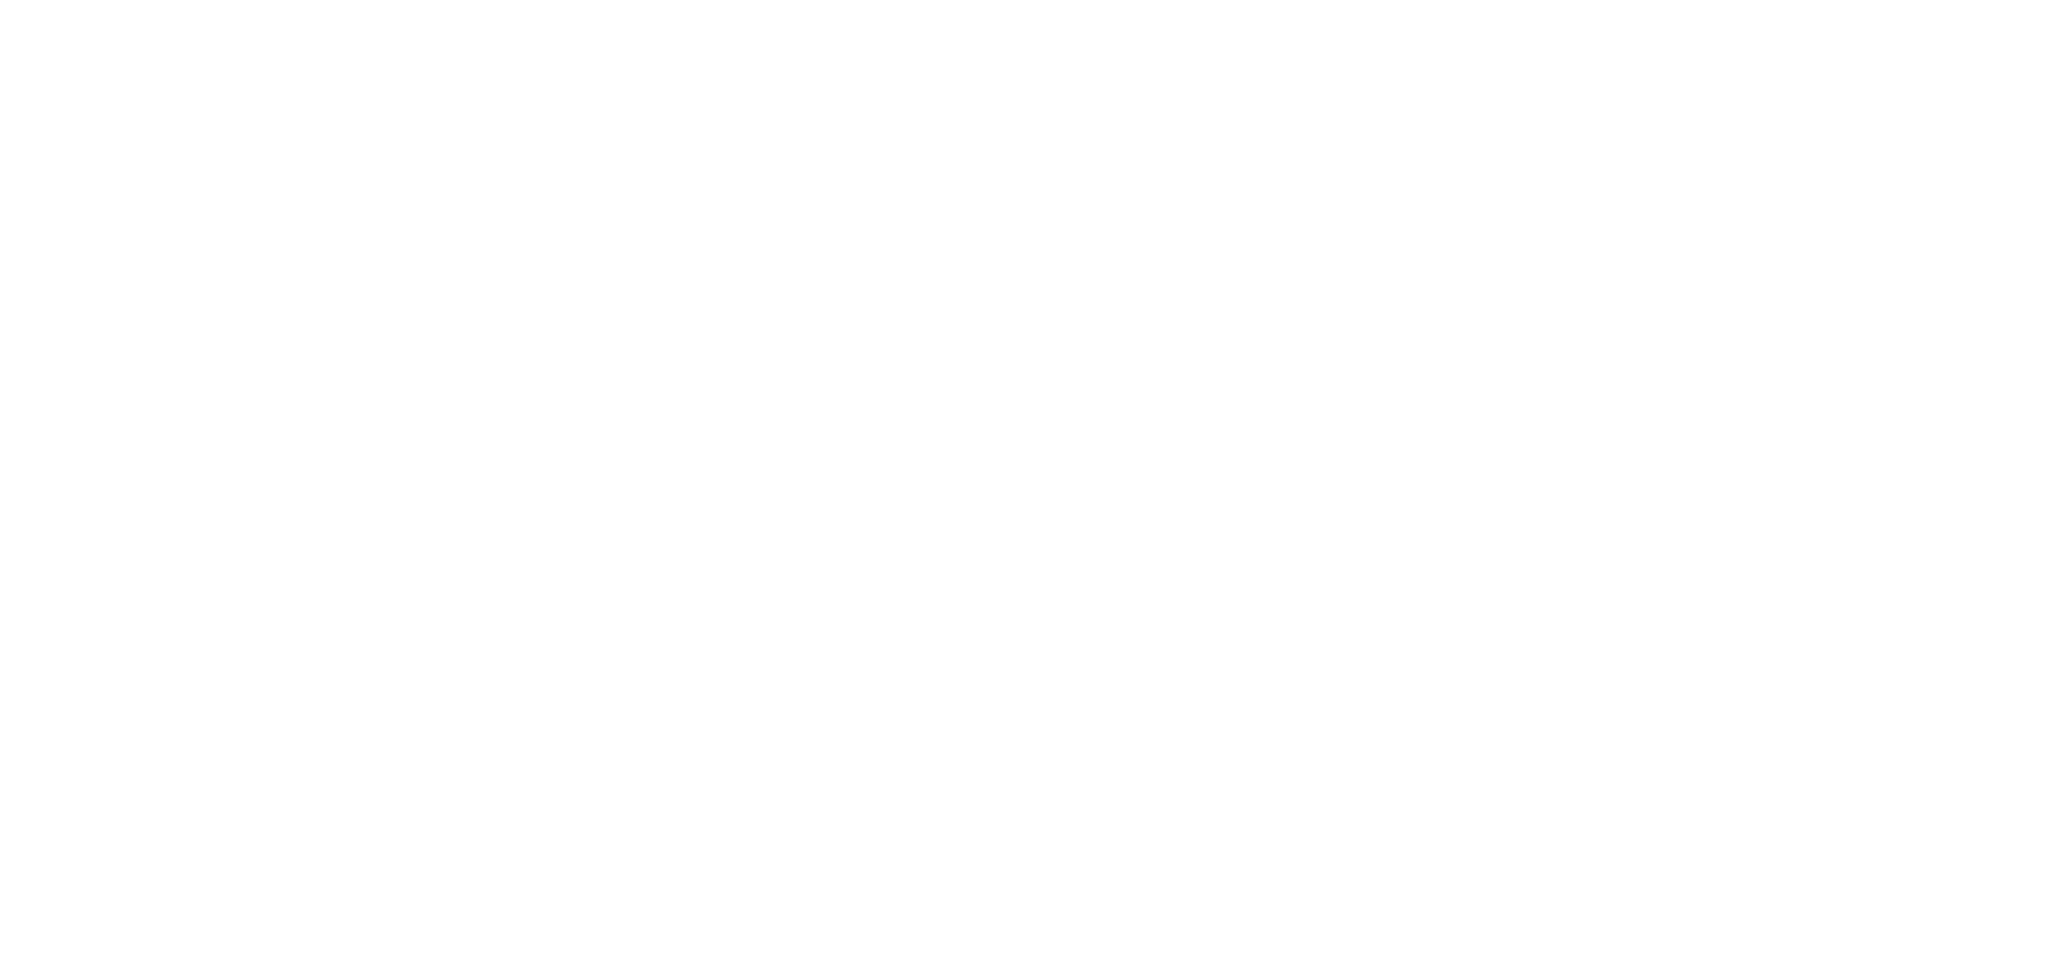 Evergreen Action